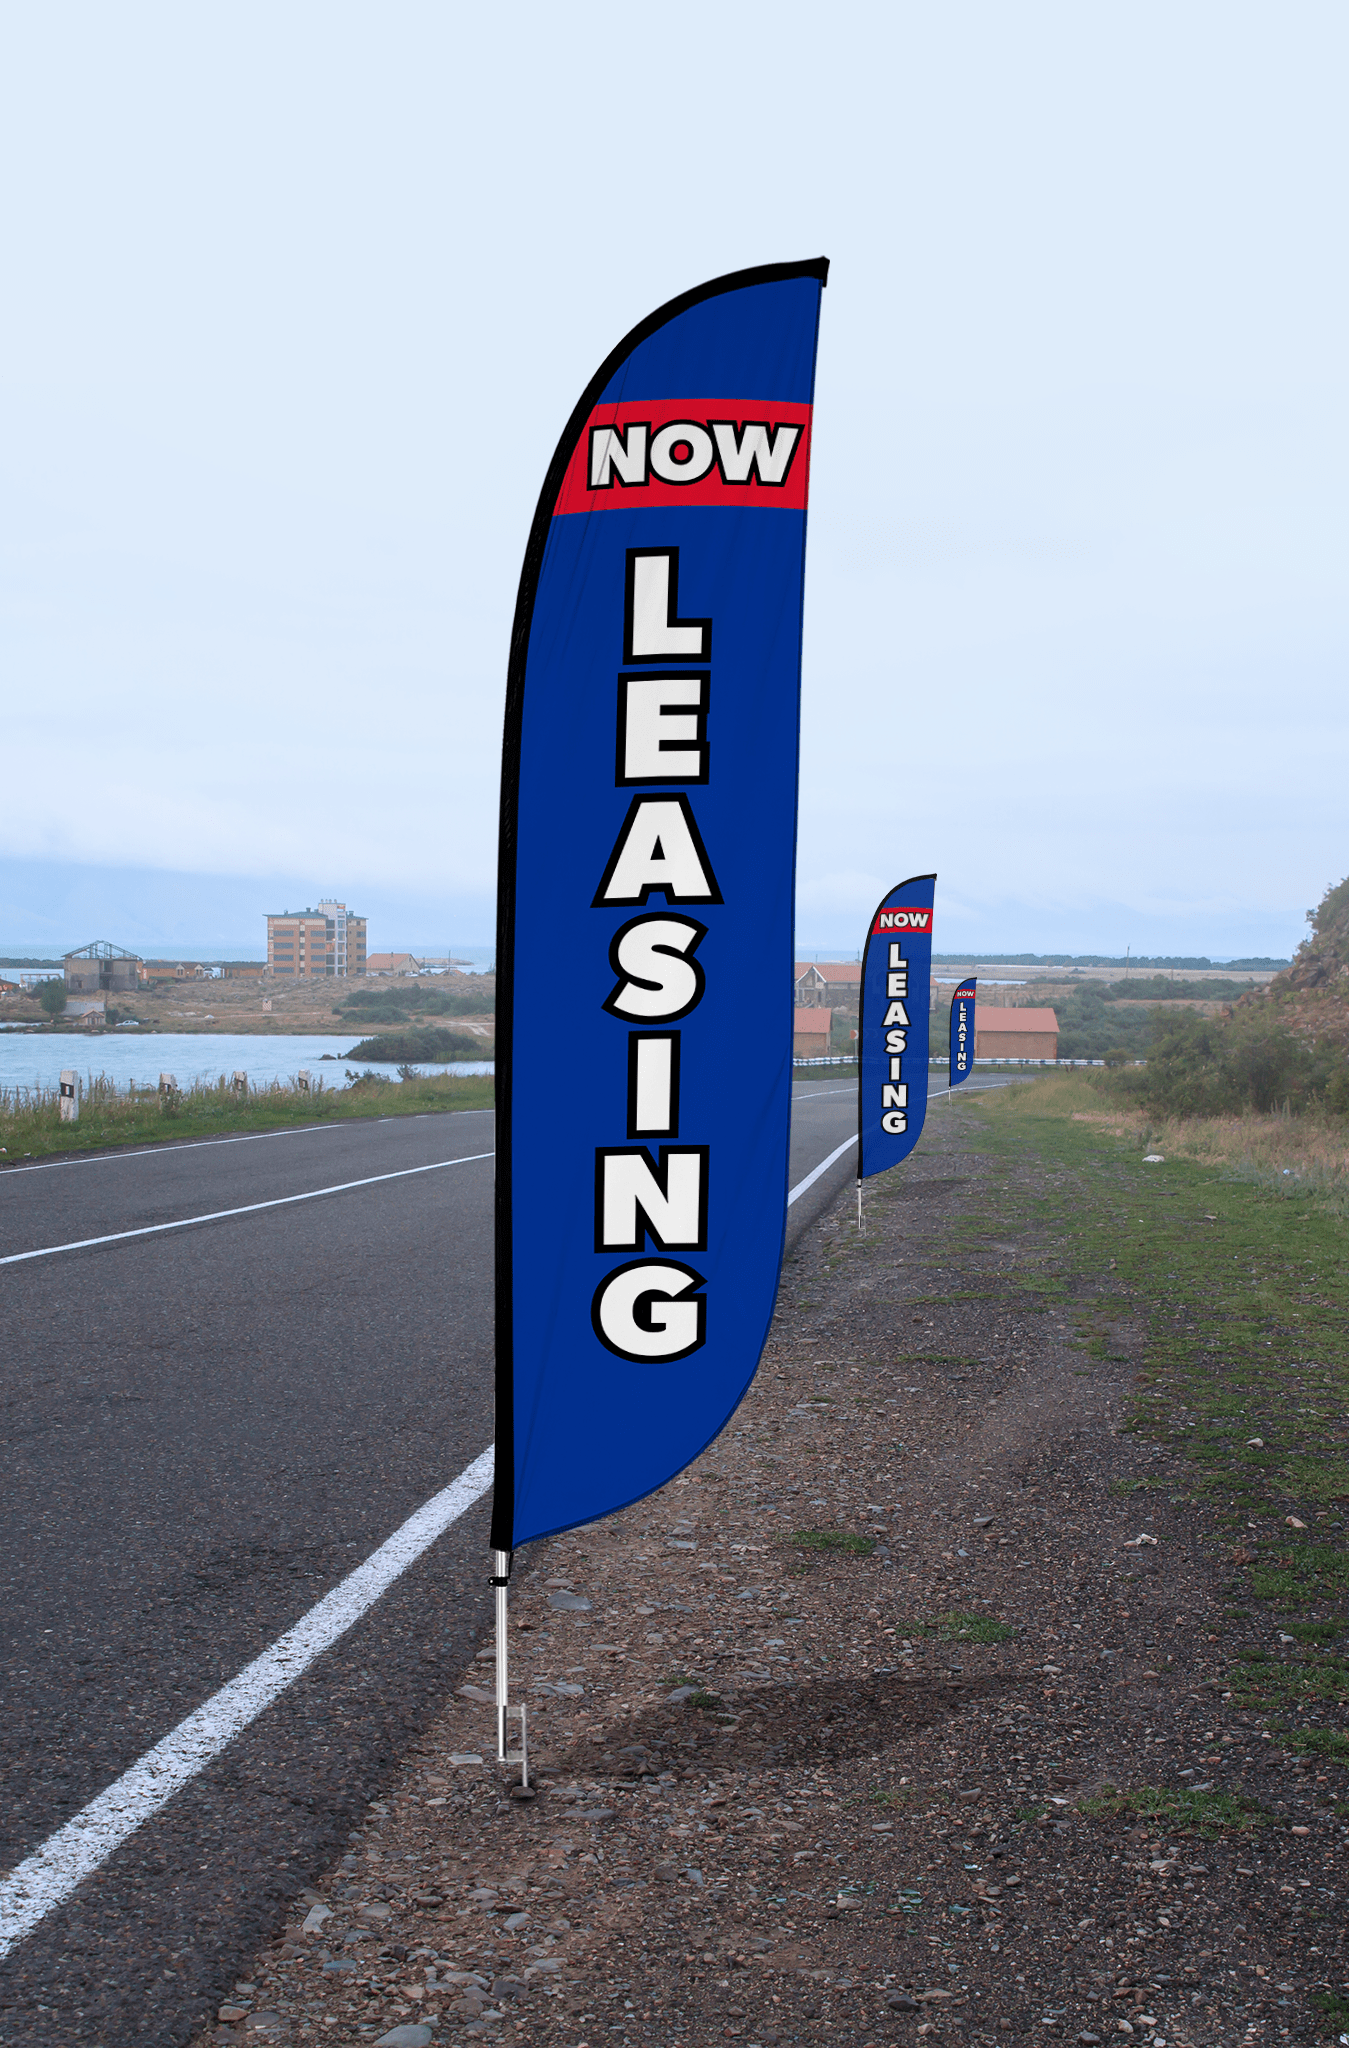 Now Leasing Feather Flag Blue & Red 